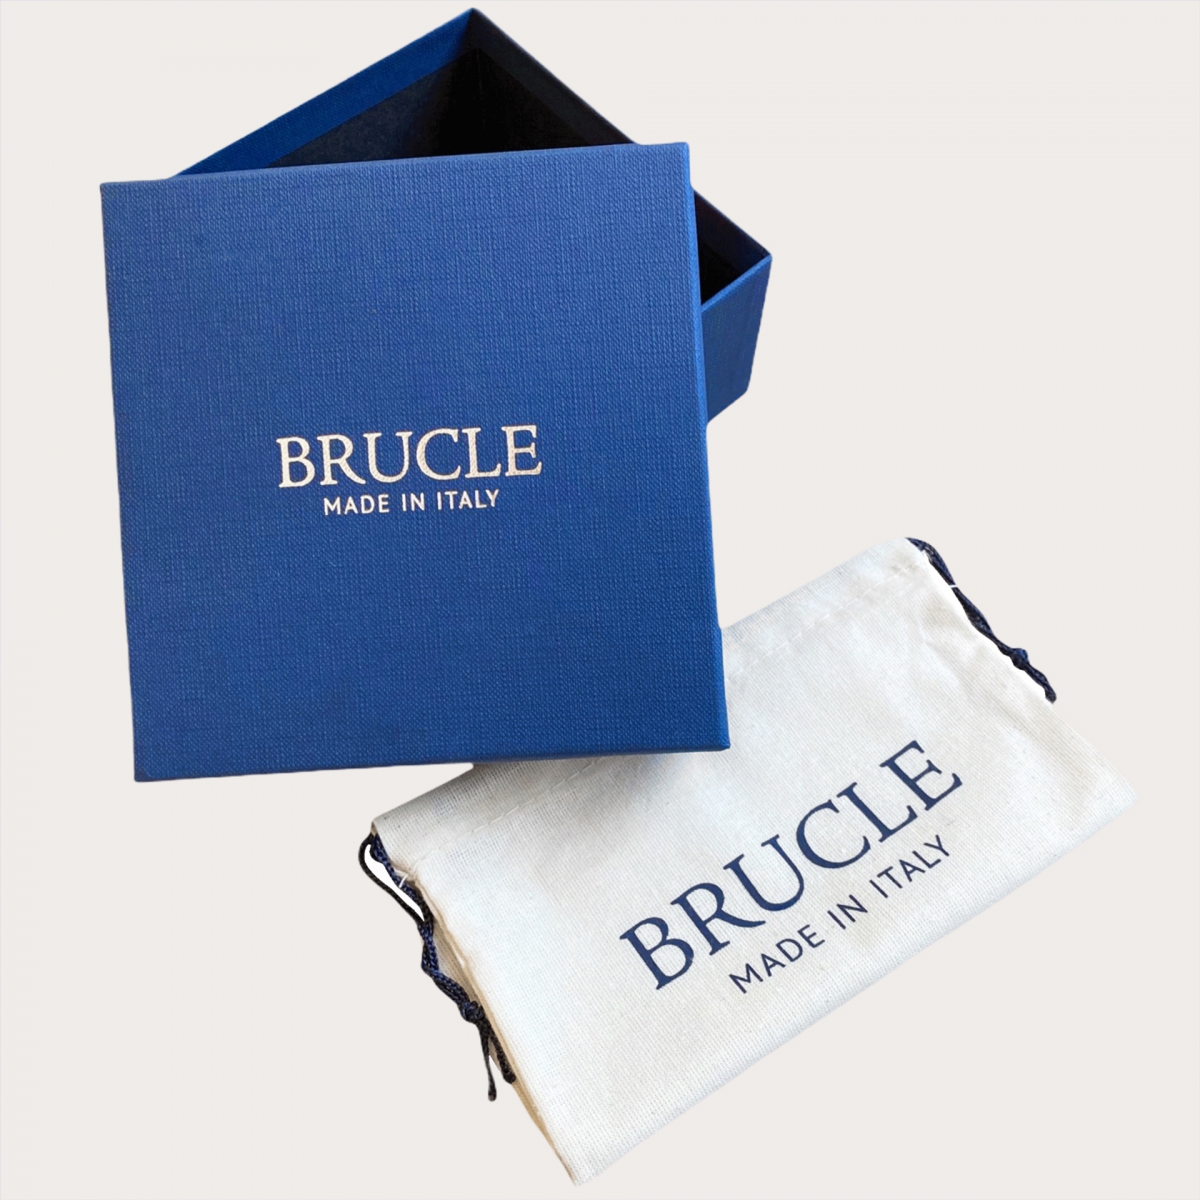 BRUCLE Braided elastic belt in blue bonded leather